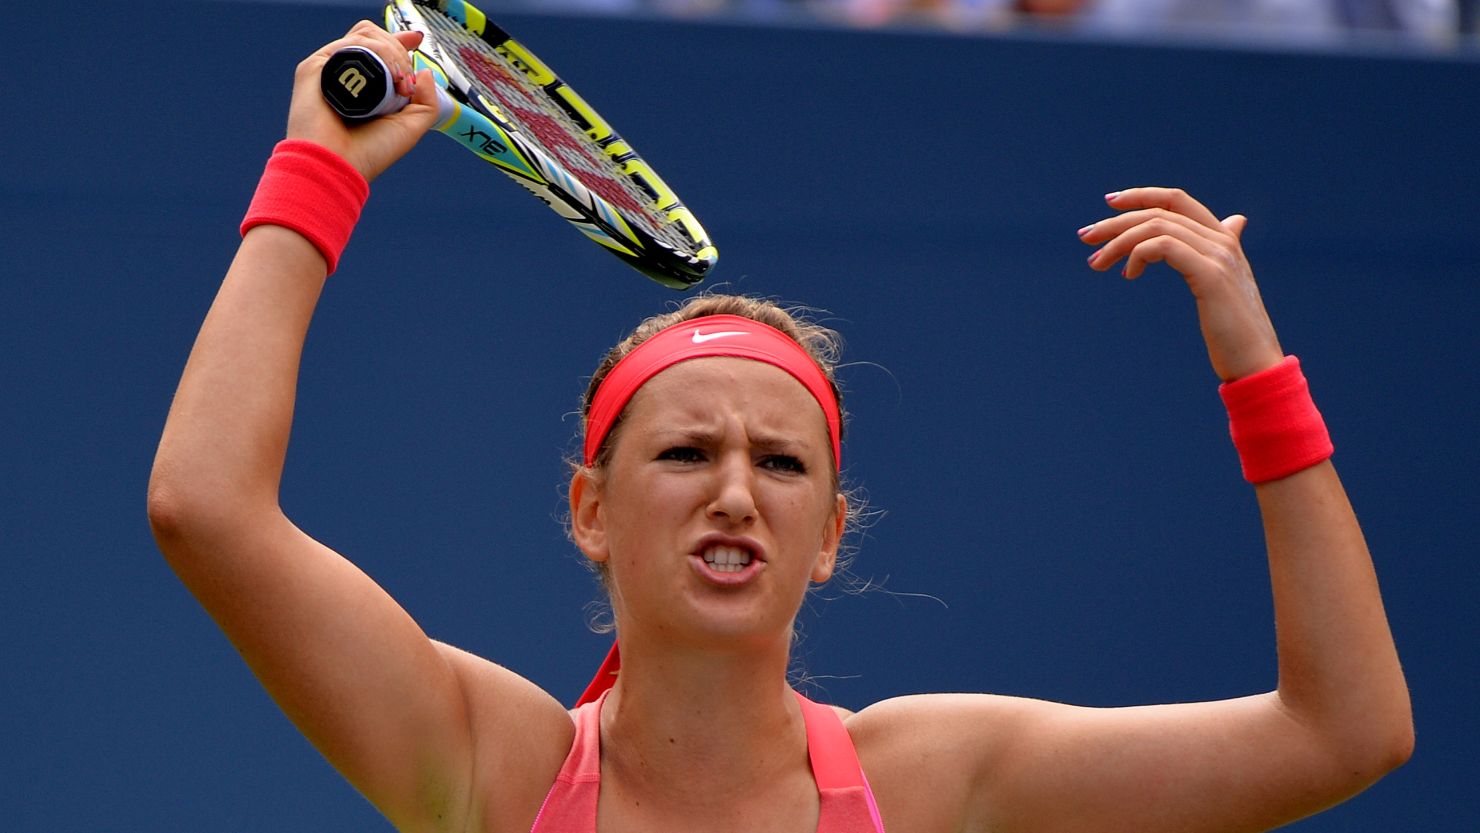 Victoria Azarenka didn't play her best at the U.S. Open in the fourth round but did enough to beat Ana Ivanovic. 